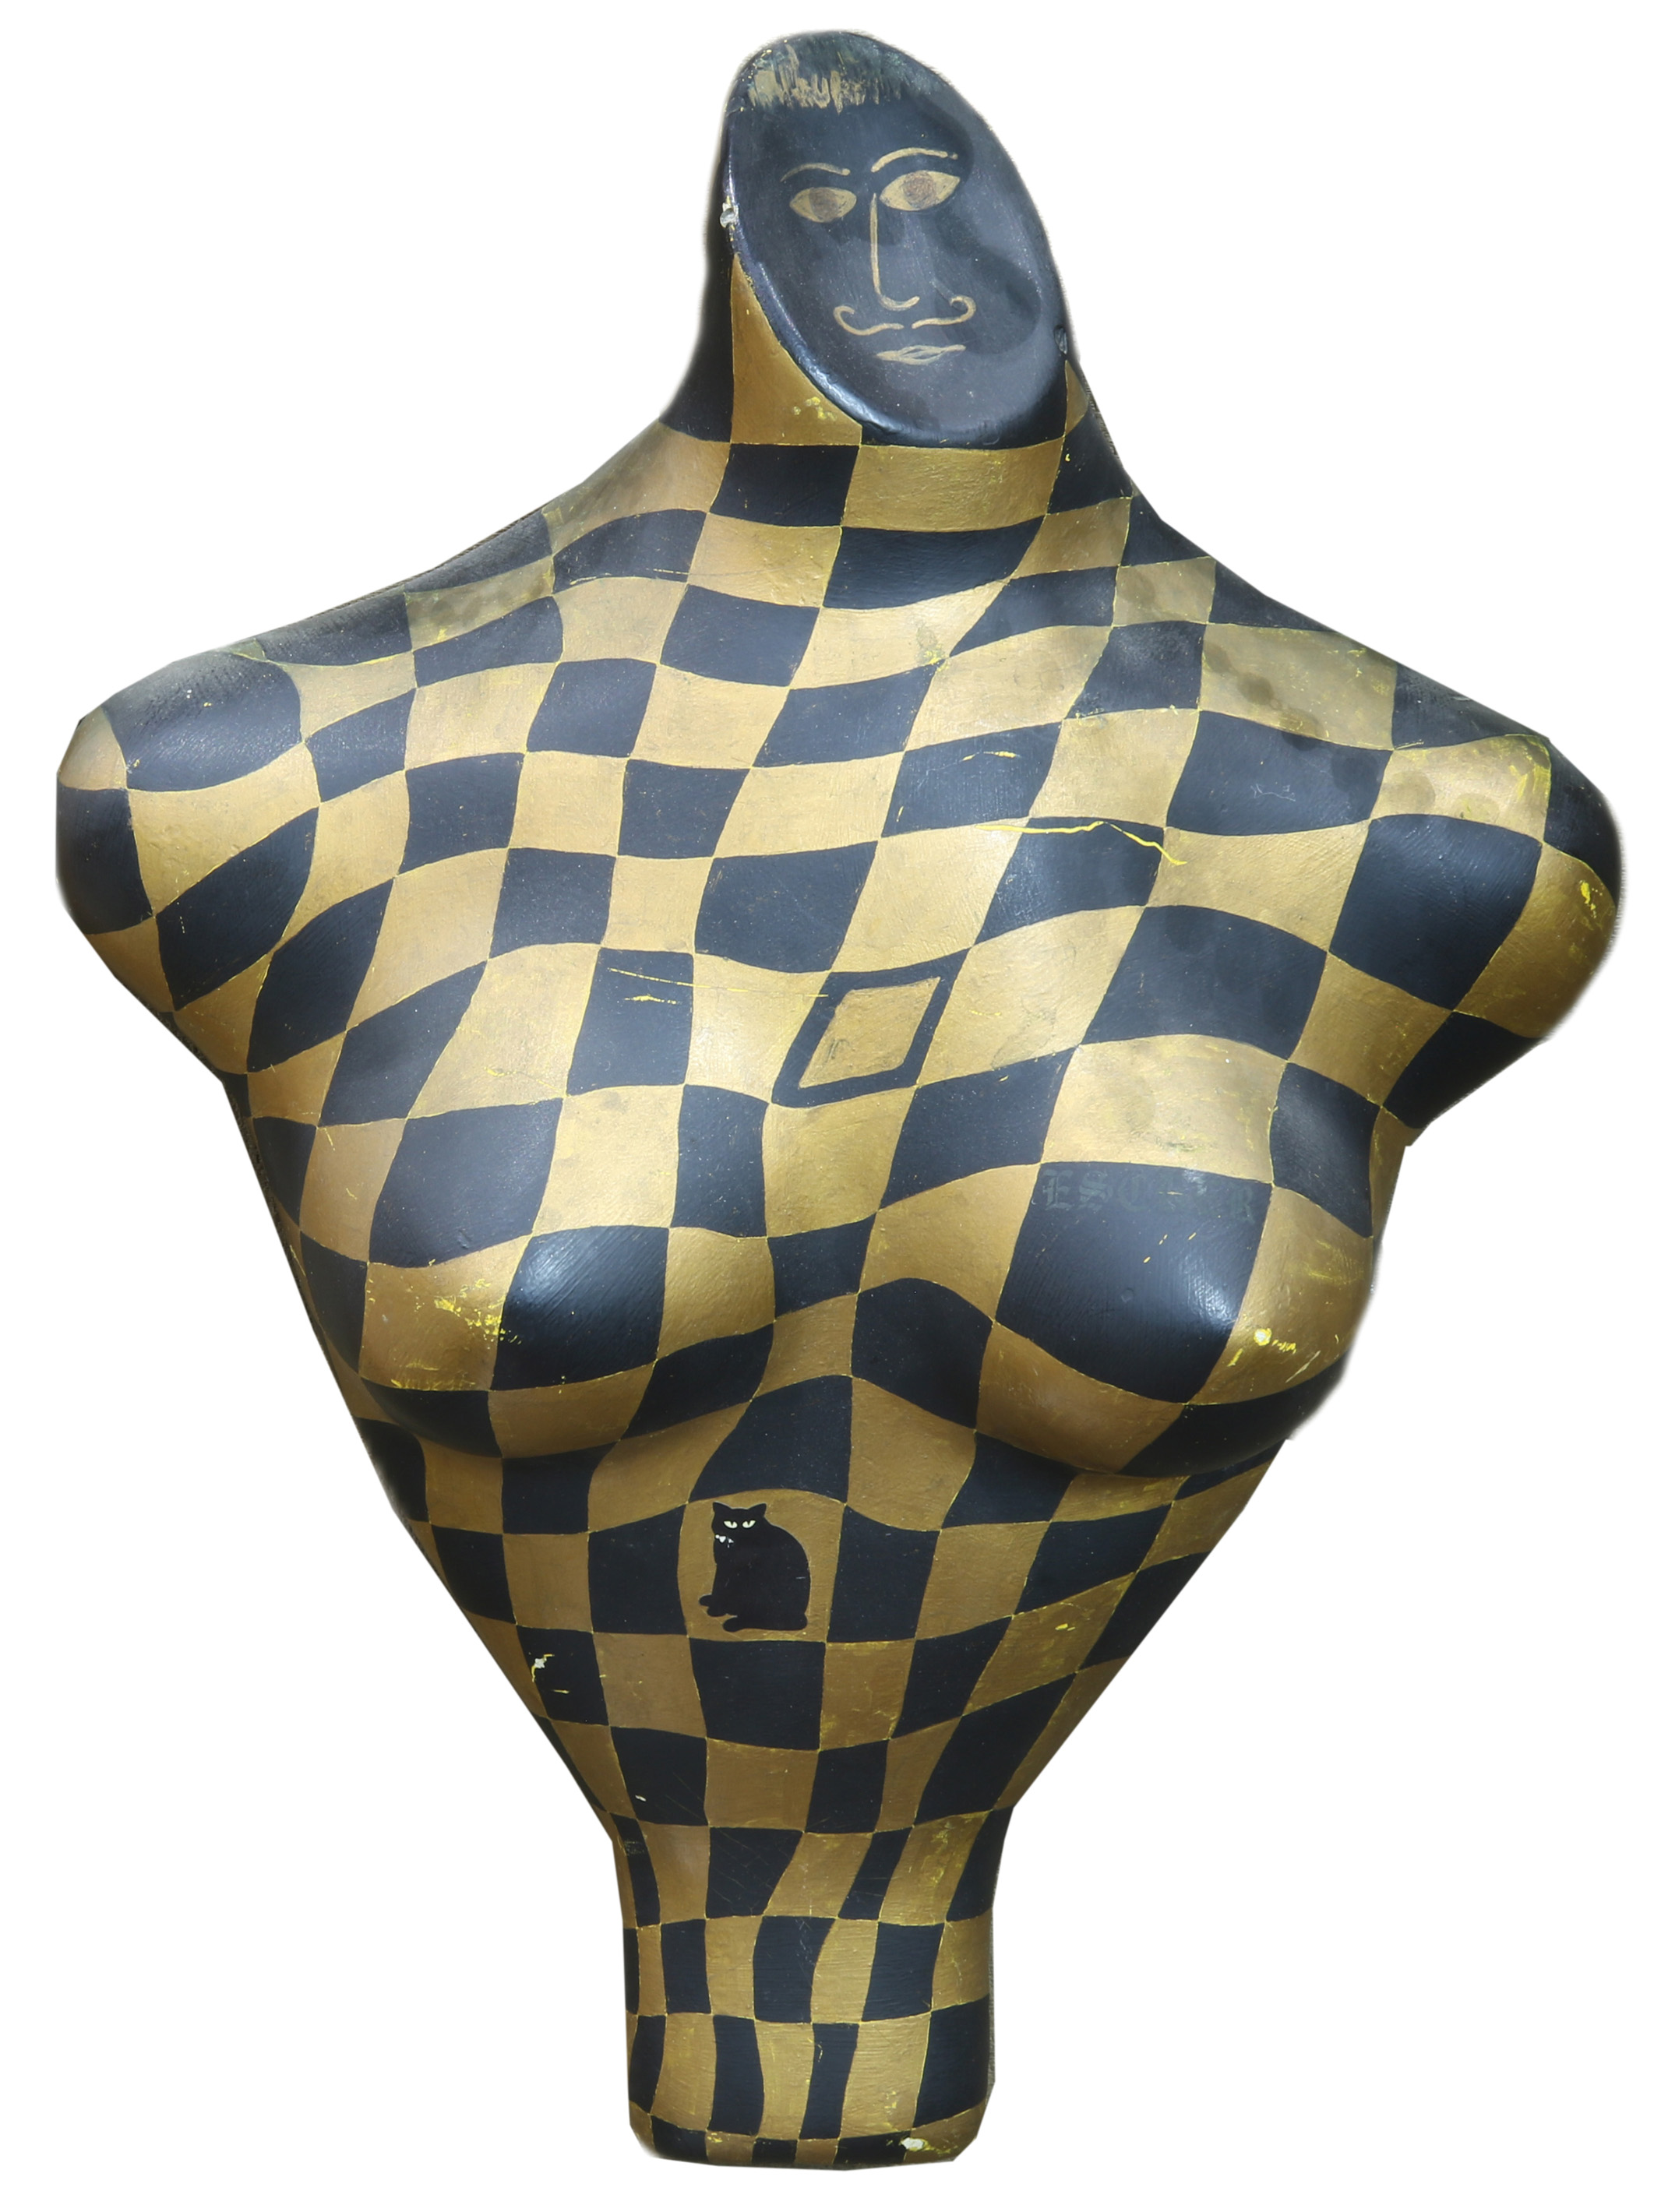 WHIMISICAL SURREAL STYLE NUDE TORSO,